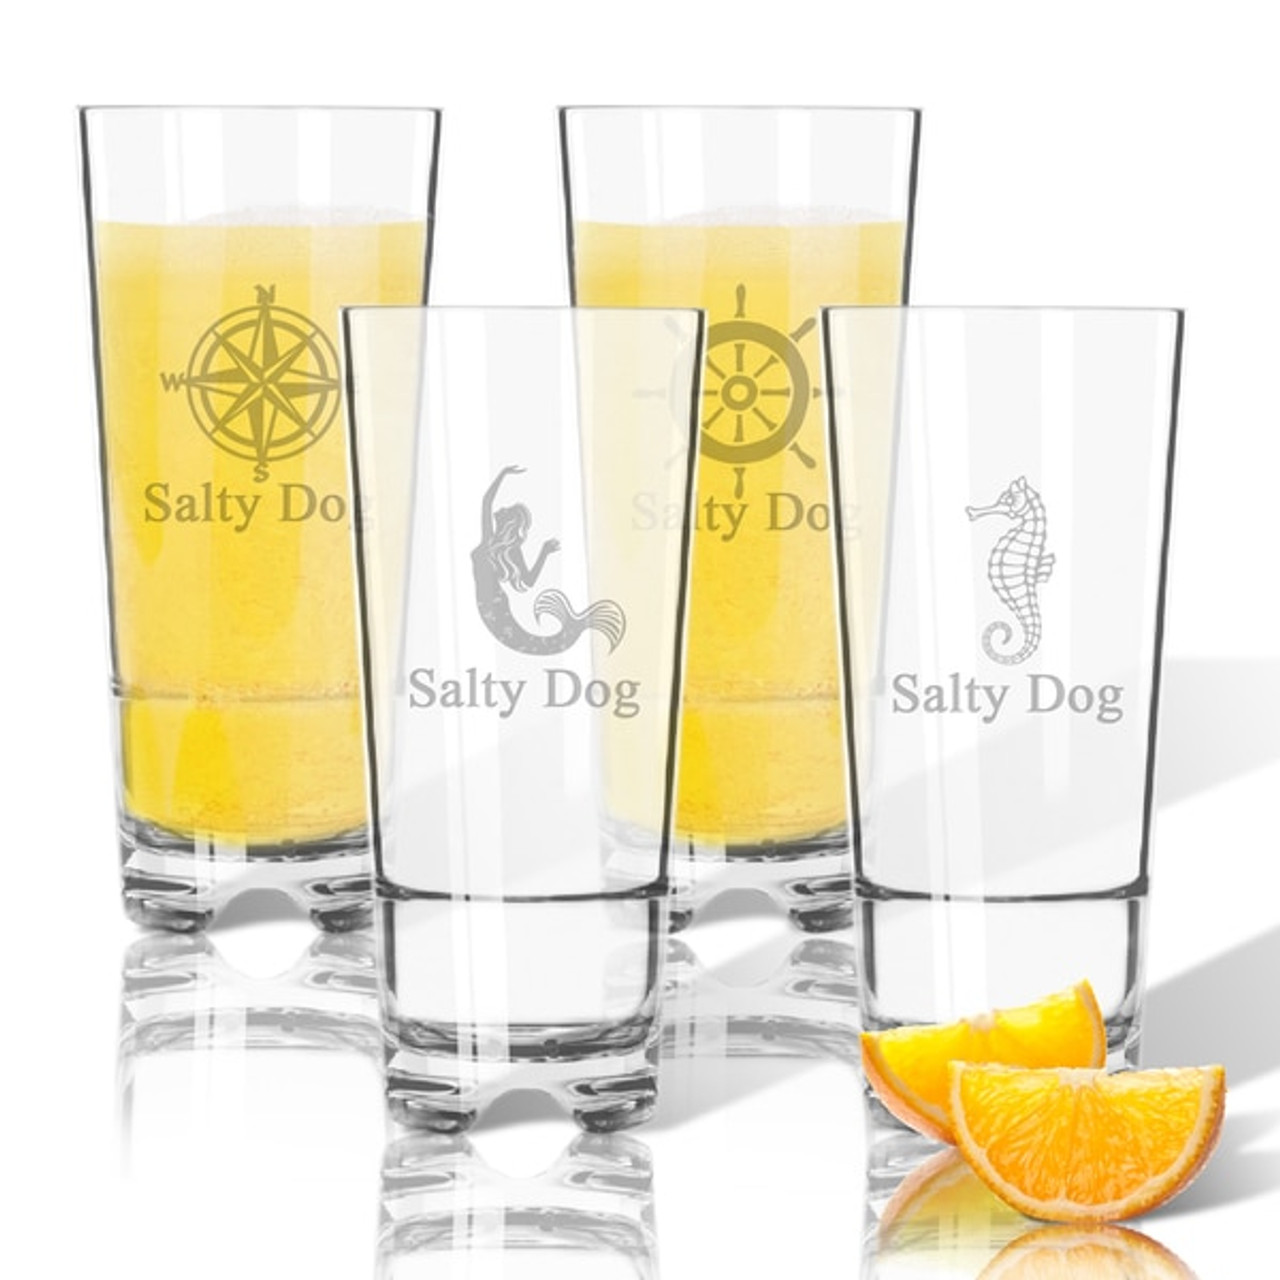 https://cdn11.bigcommerce.com/s-97fac/images/stencil/1280x1280/products/129674/198215/tritan-high-ball-glasses-16-oz-set-of-4-nautical-with-name-11__63963.1517308273__86821.1610402105.jpg?c=2